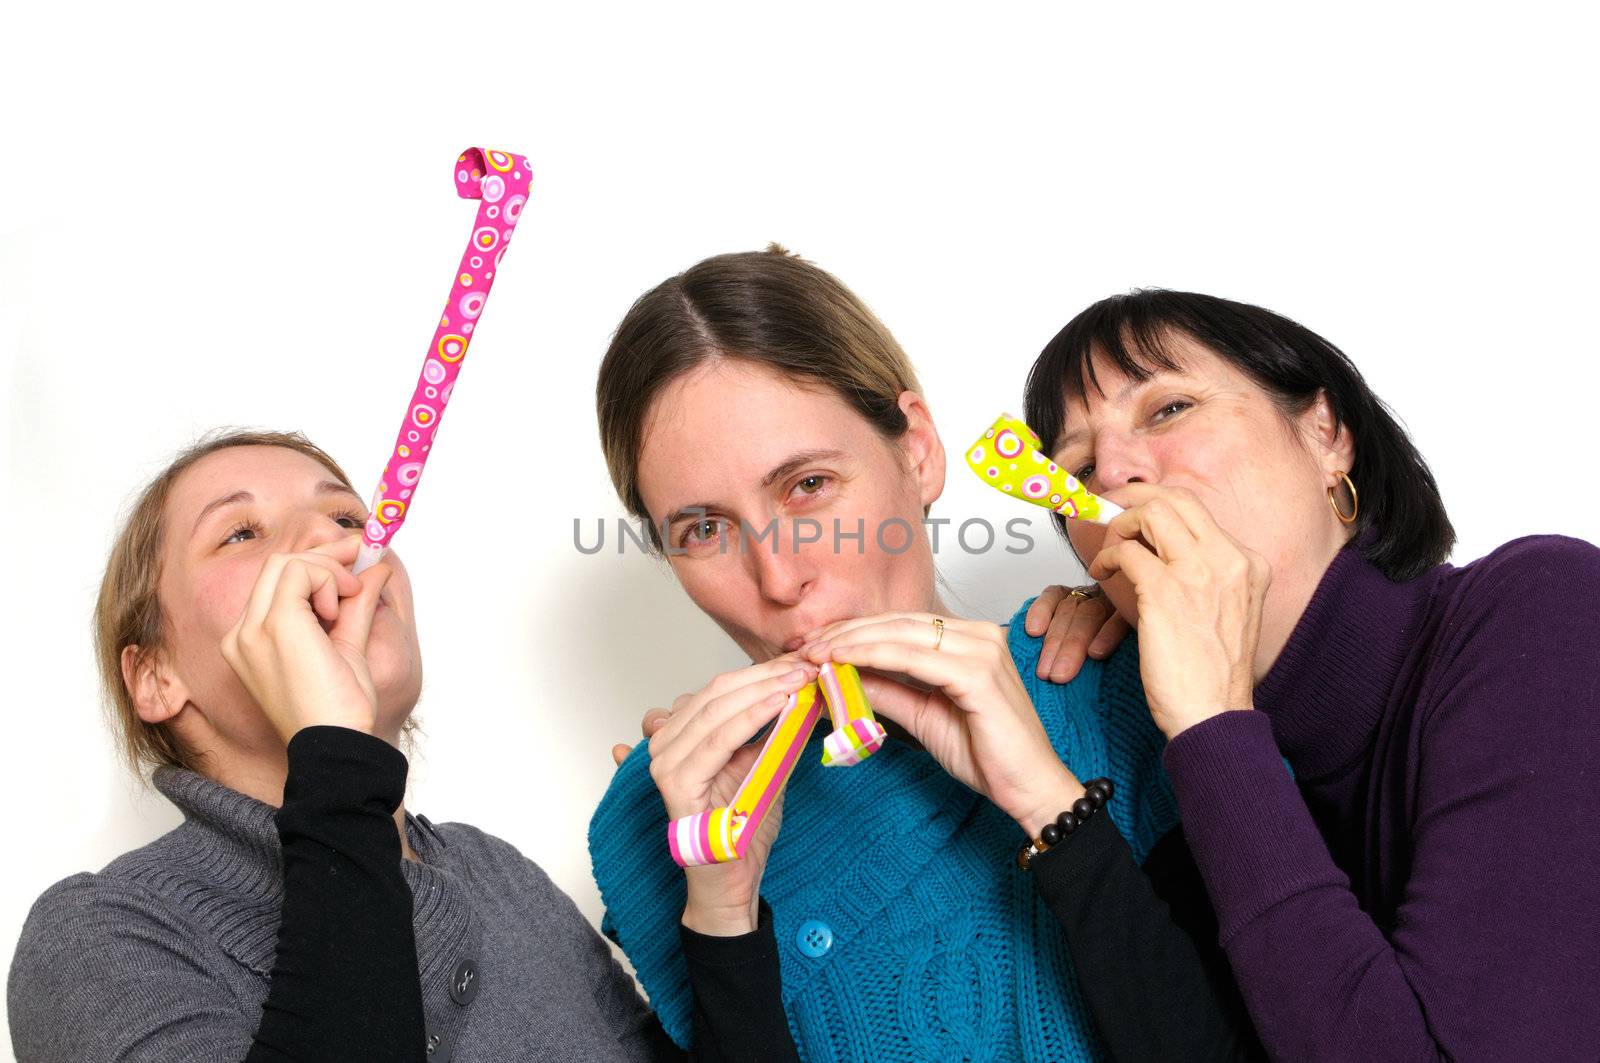 Two young women and her mother celebrating New year's eve. Shot taken in front of white background